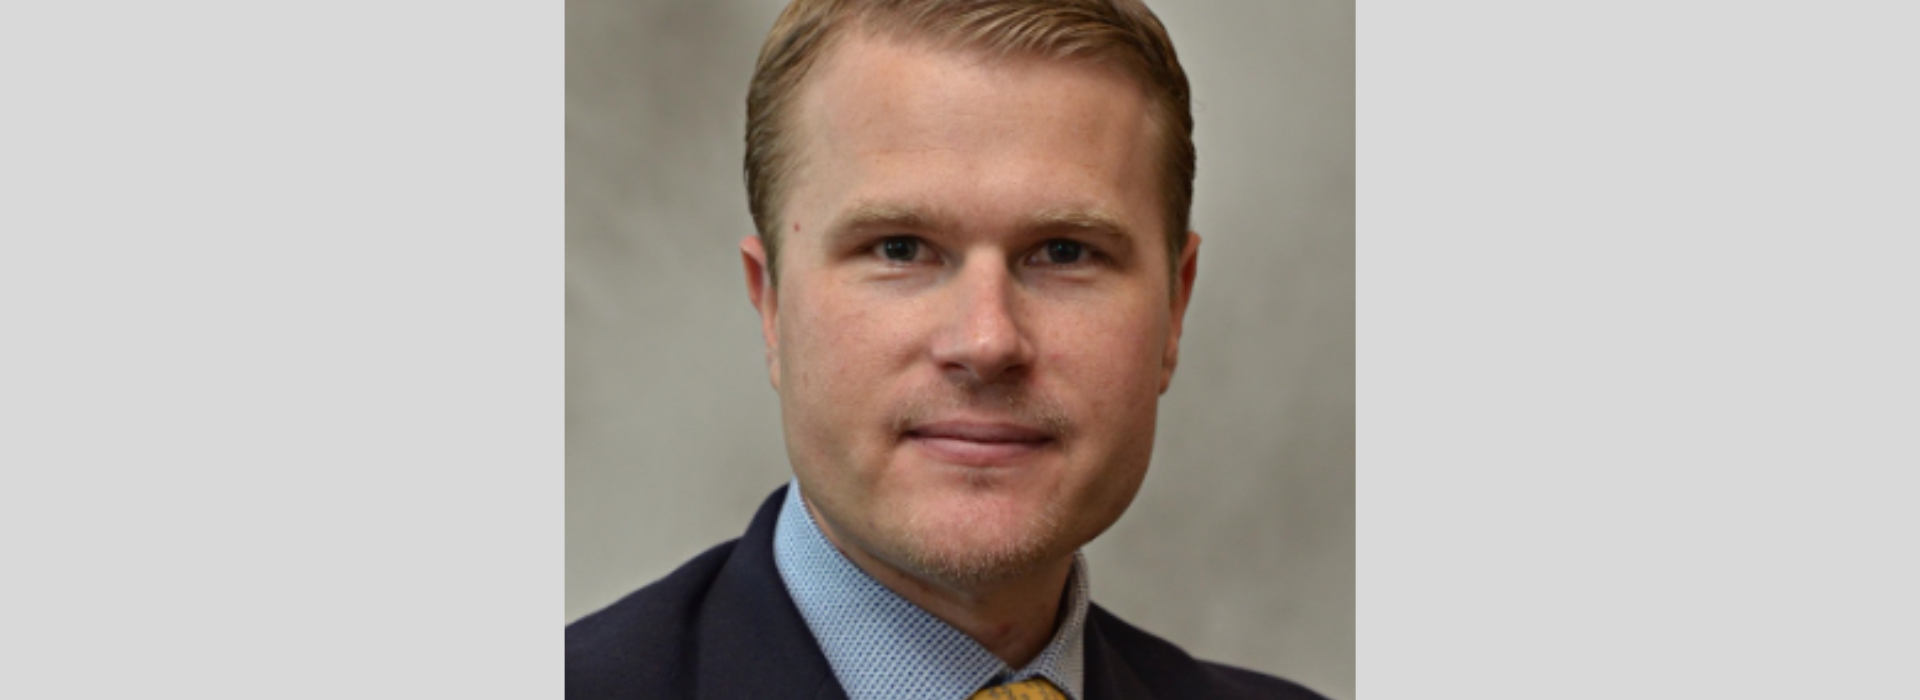 Division of Colon and Rectal Surgery Announces New Chief, Wolfgang Gaertner, MD, MSC